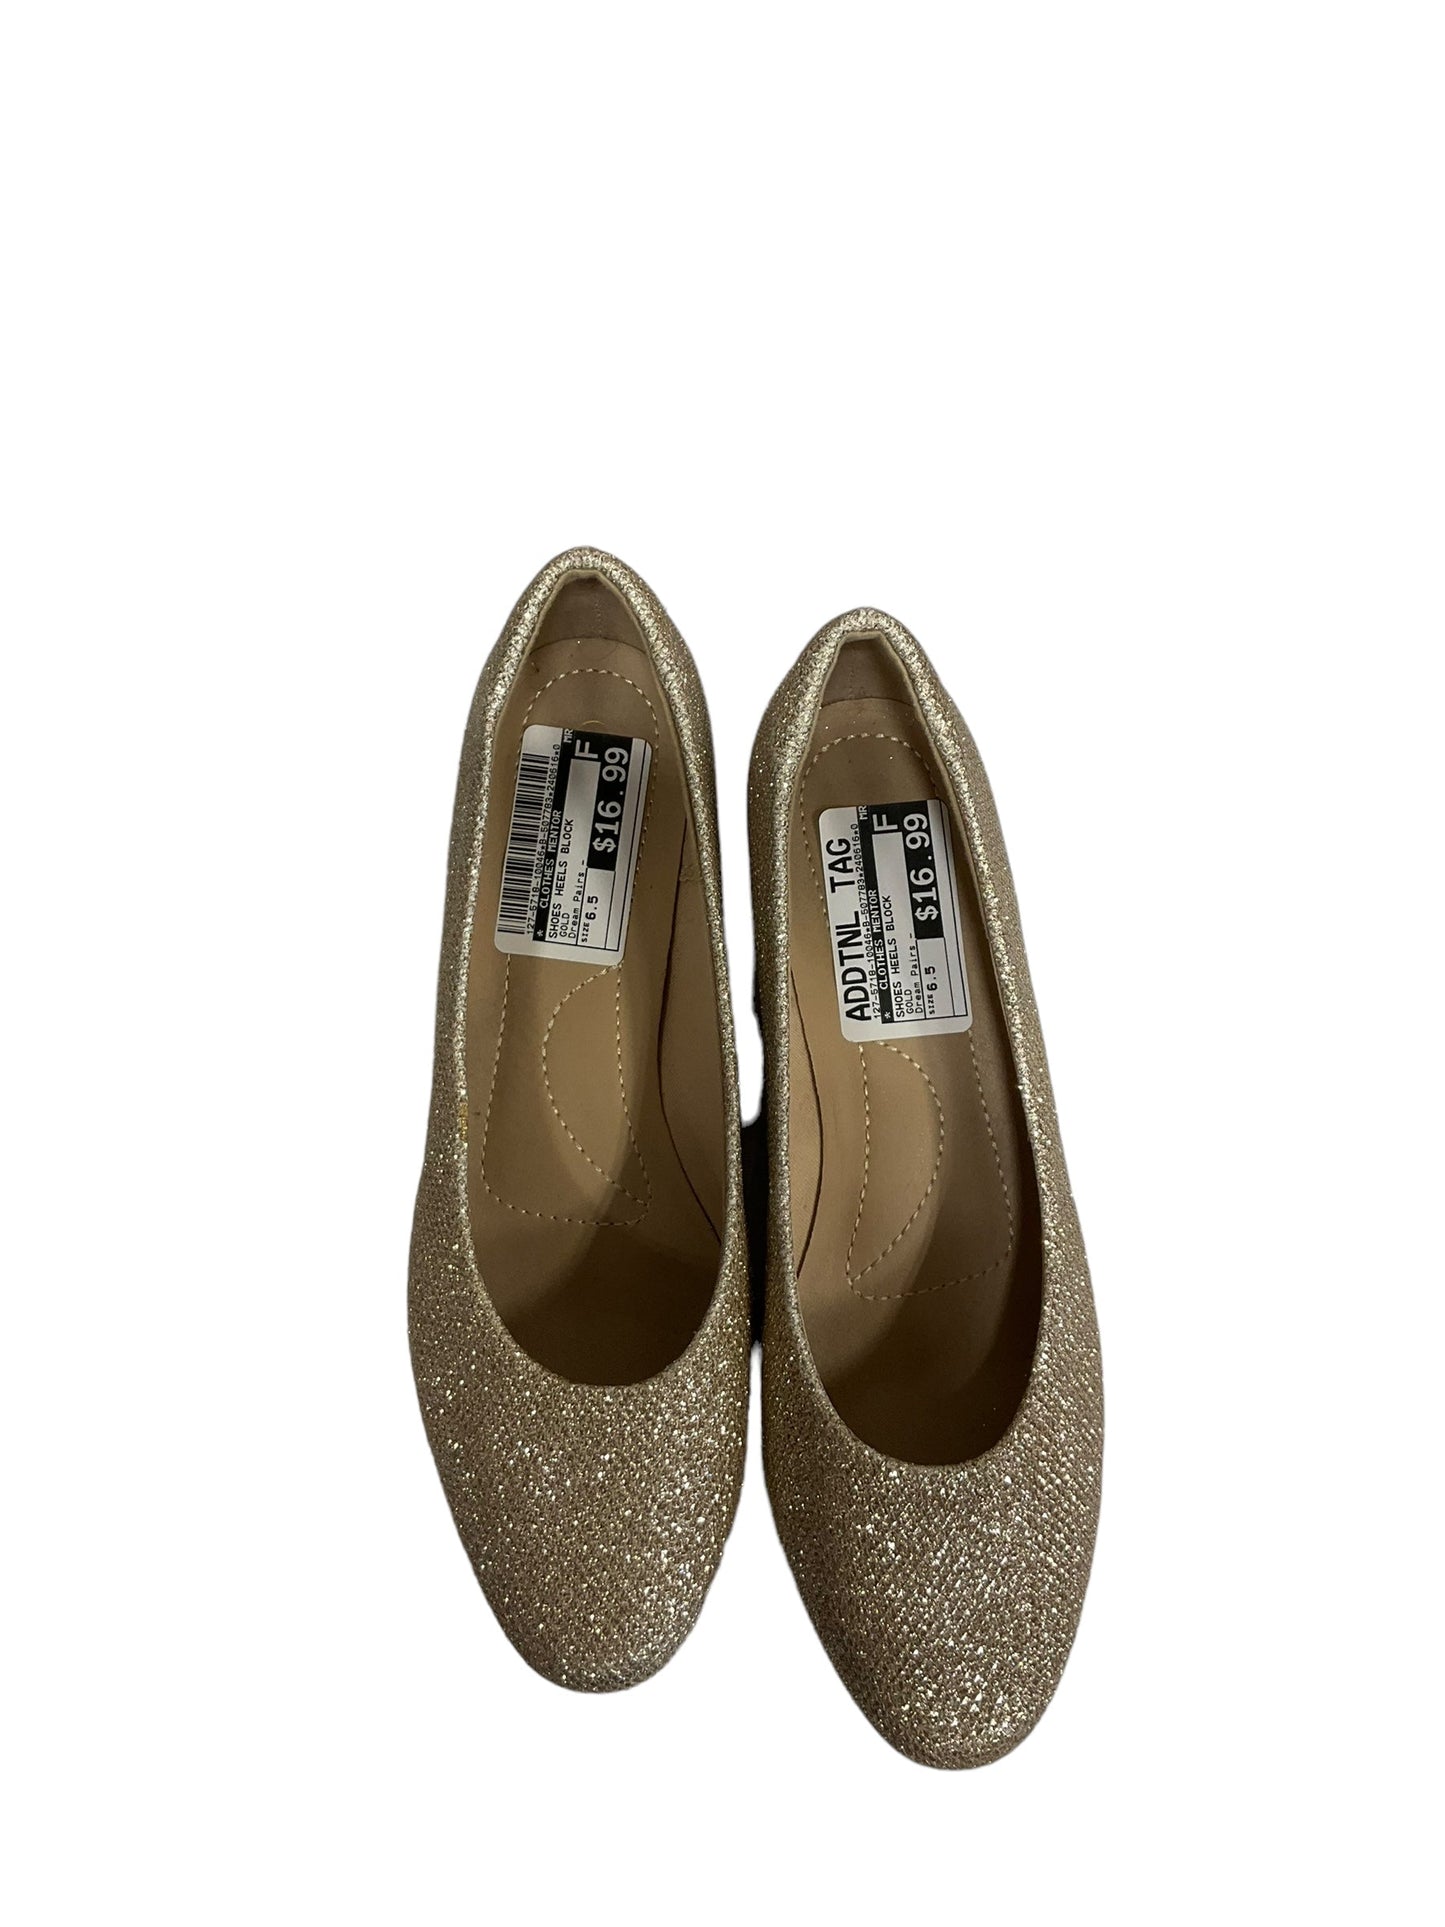 Gold Shoes Heels Block Clothes Mentor, Size 6.5